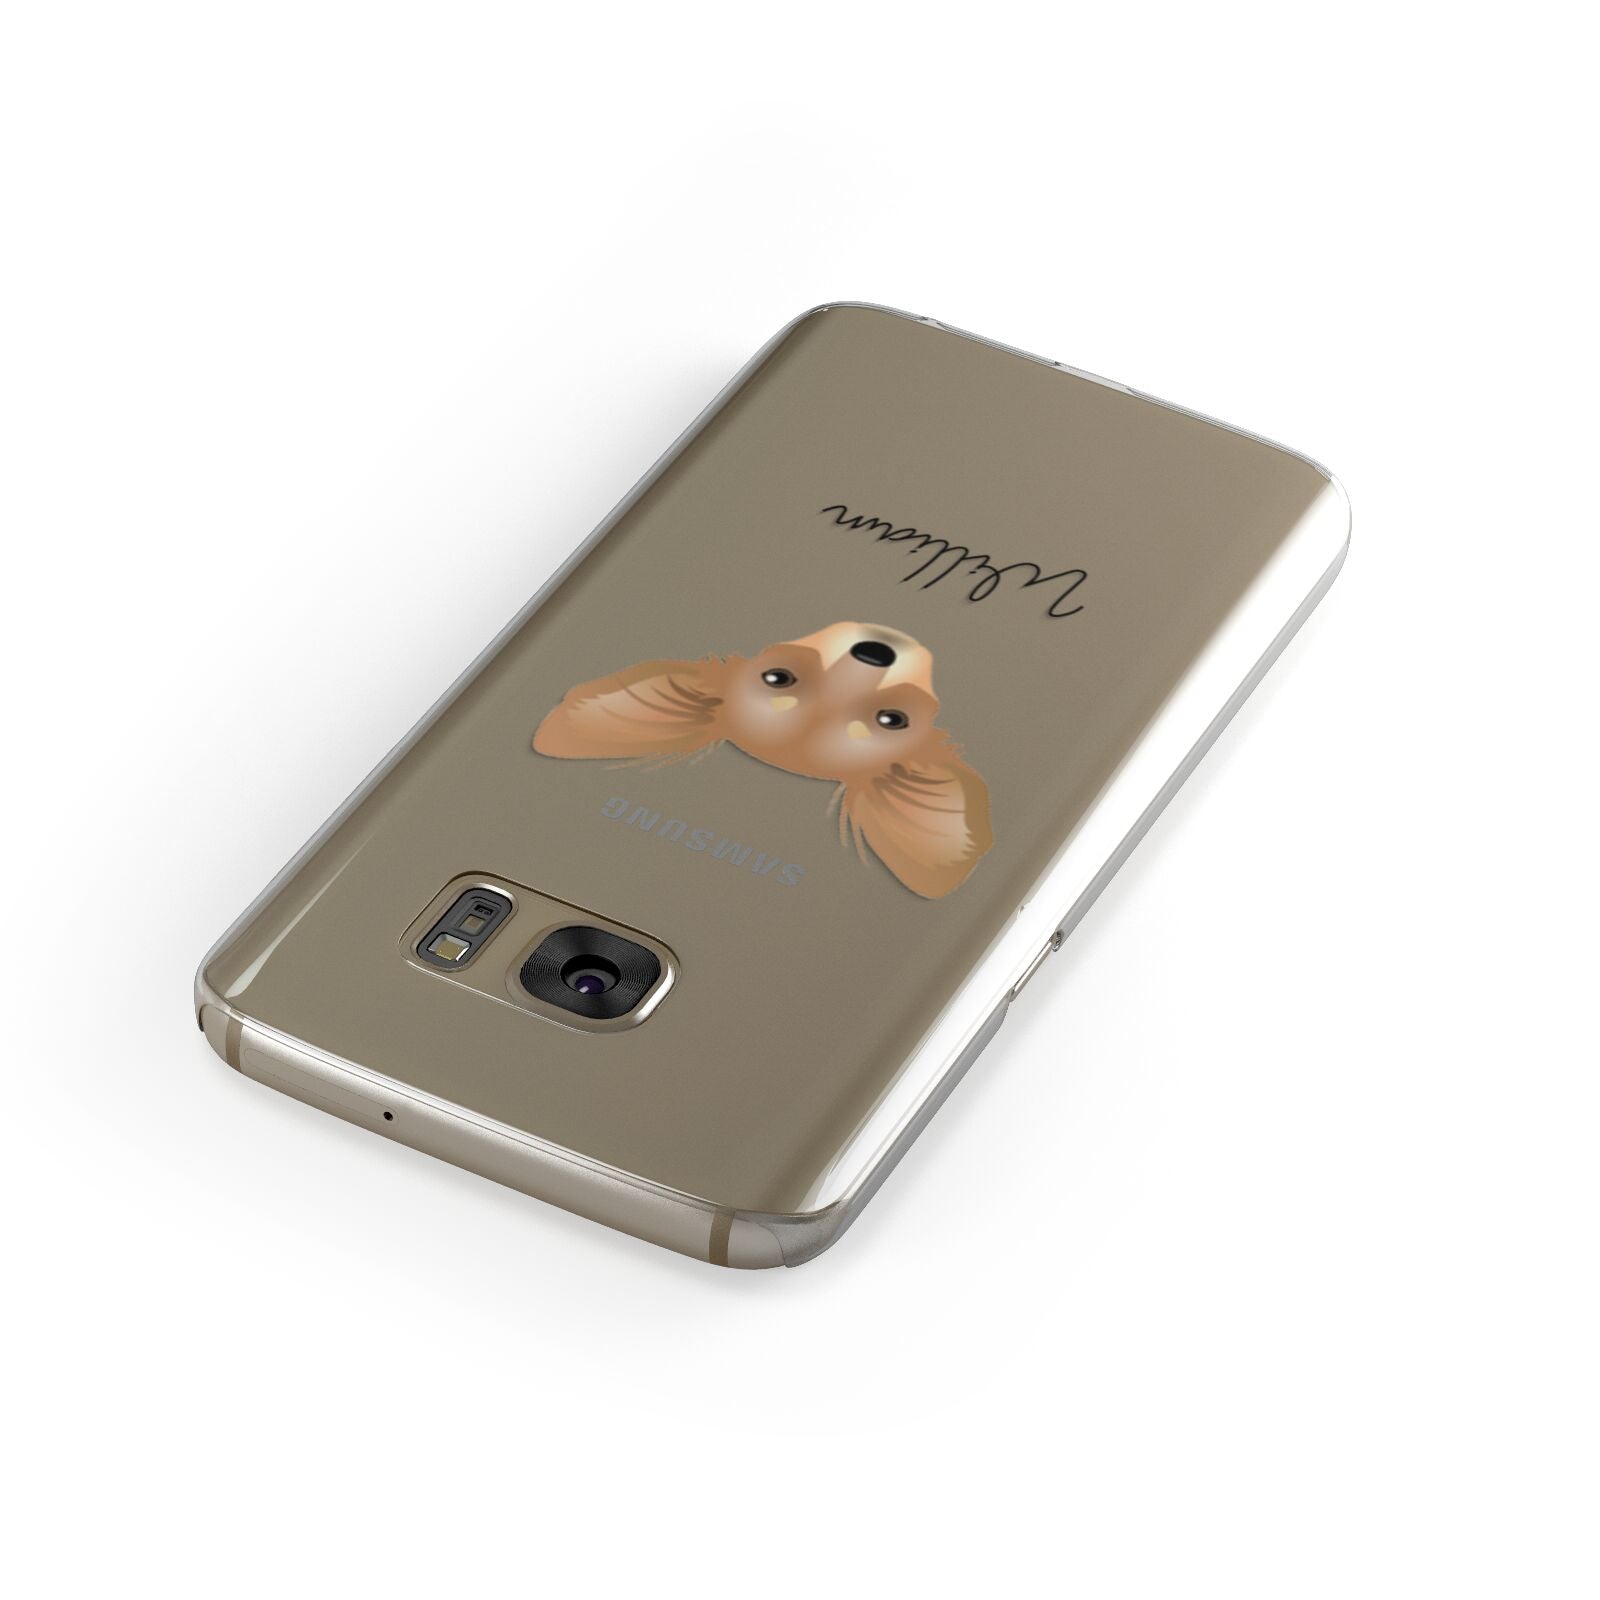 Russian Toy Personalised Samsung Galaxy Case Front Close Up